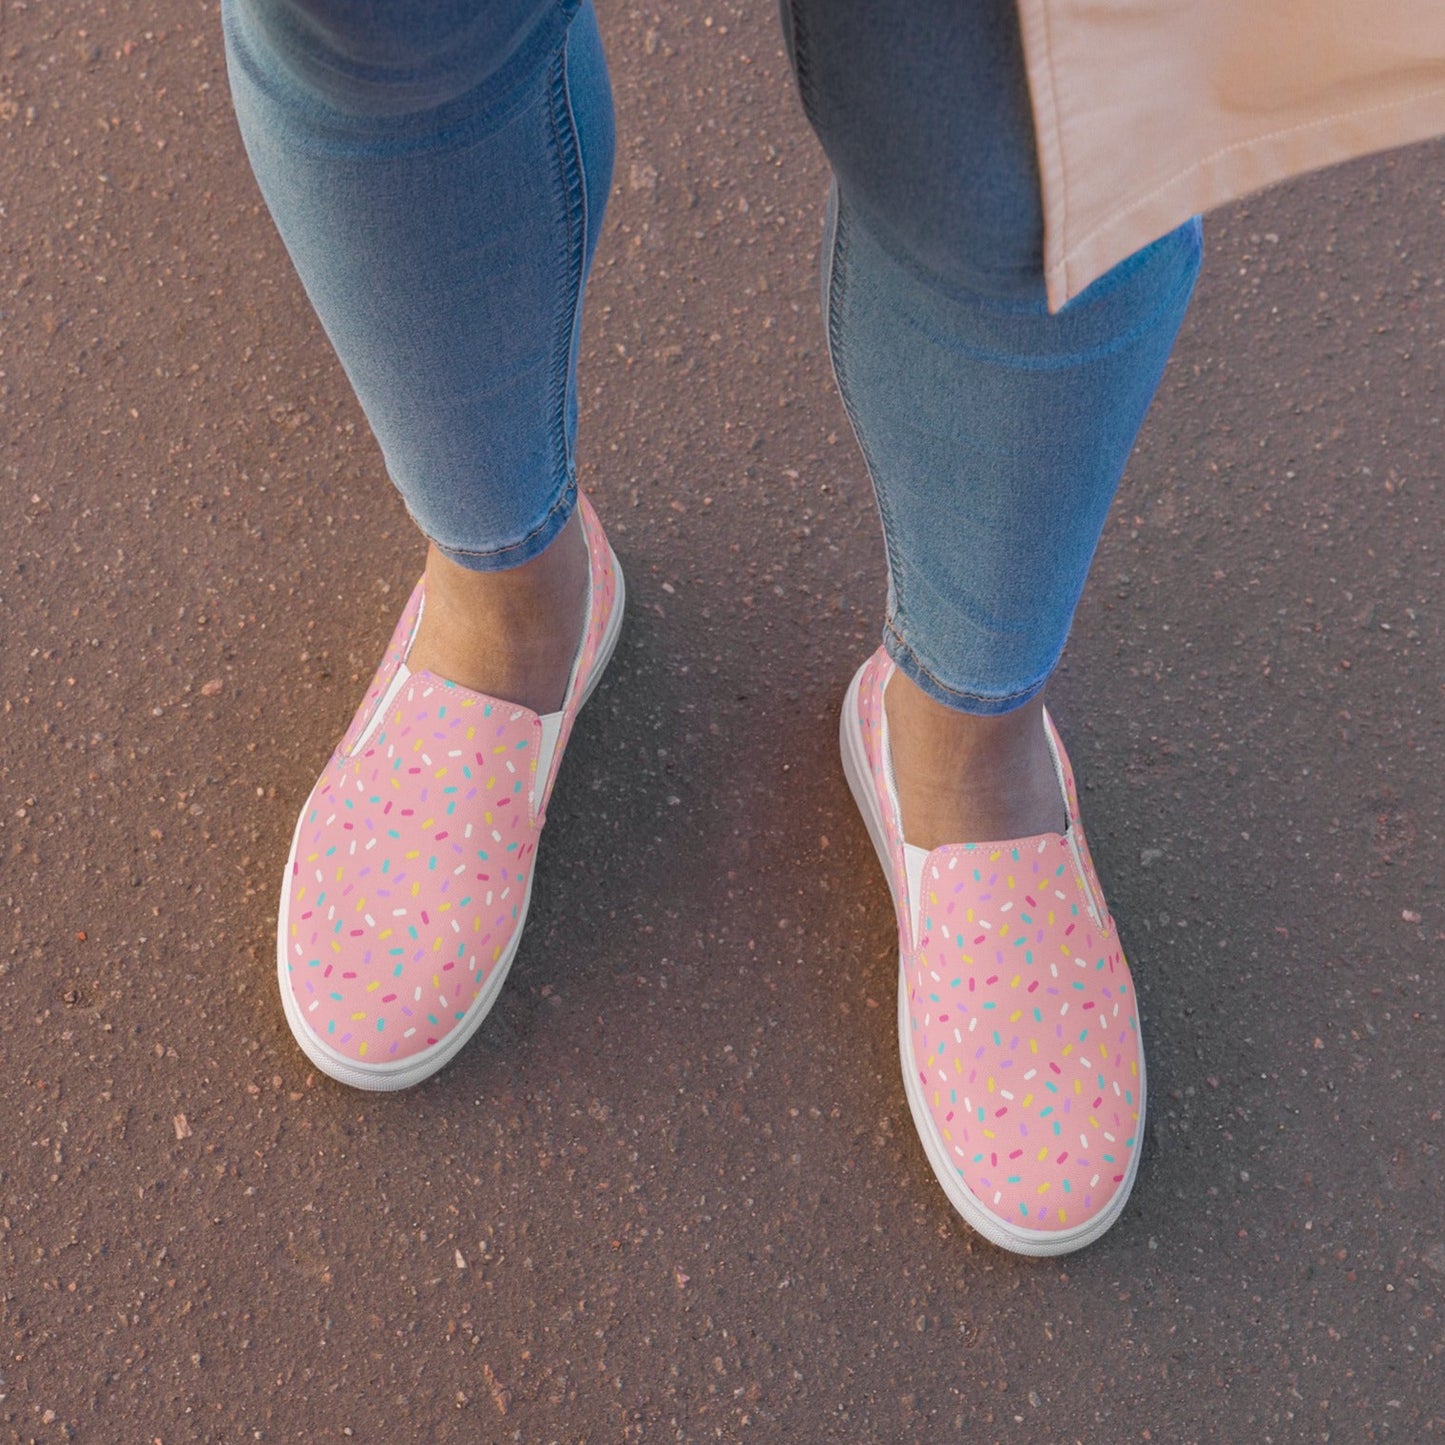 Sprinkled with Love - Women’s Slip-on Canvas Shoes in Pink